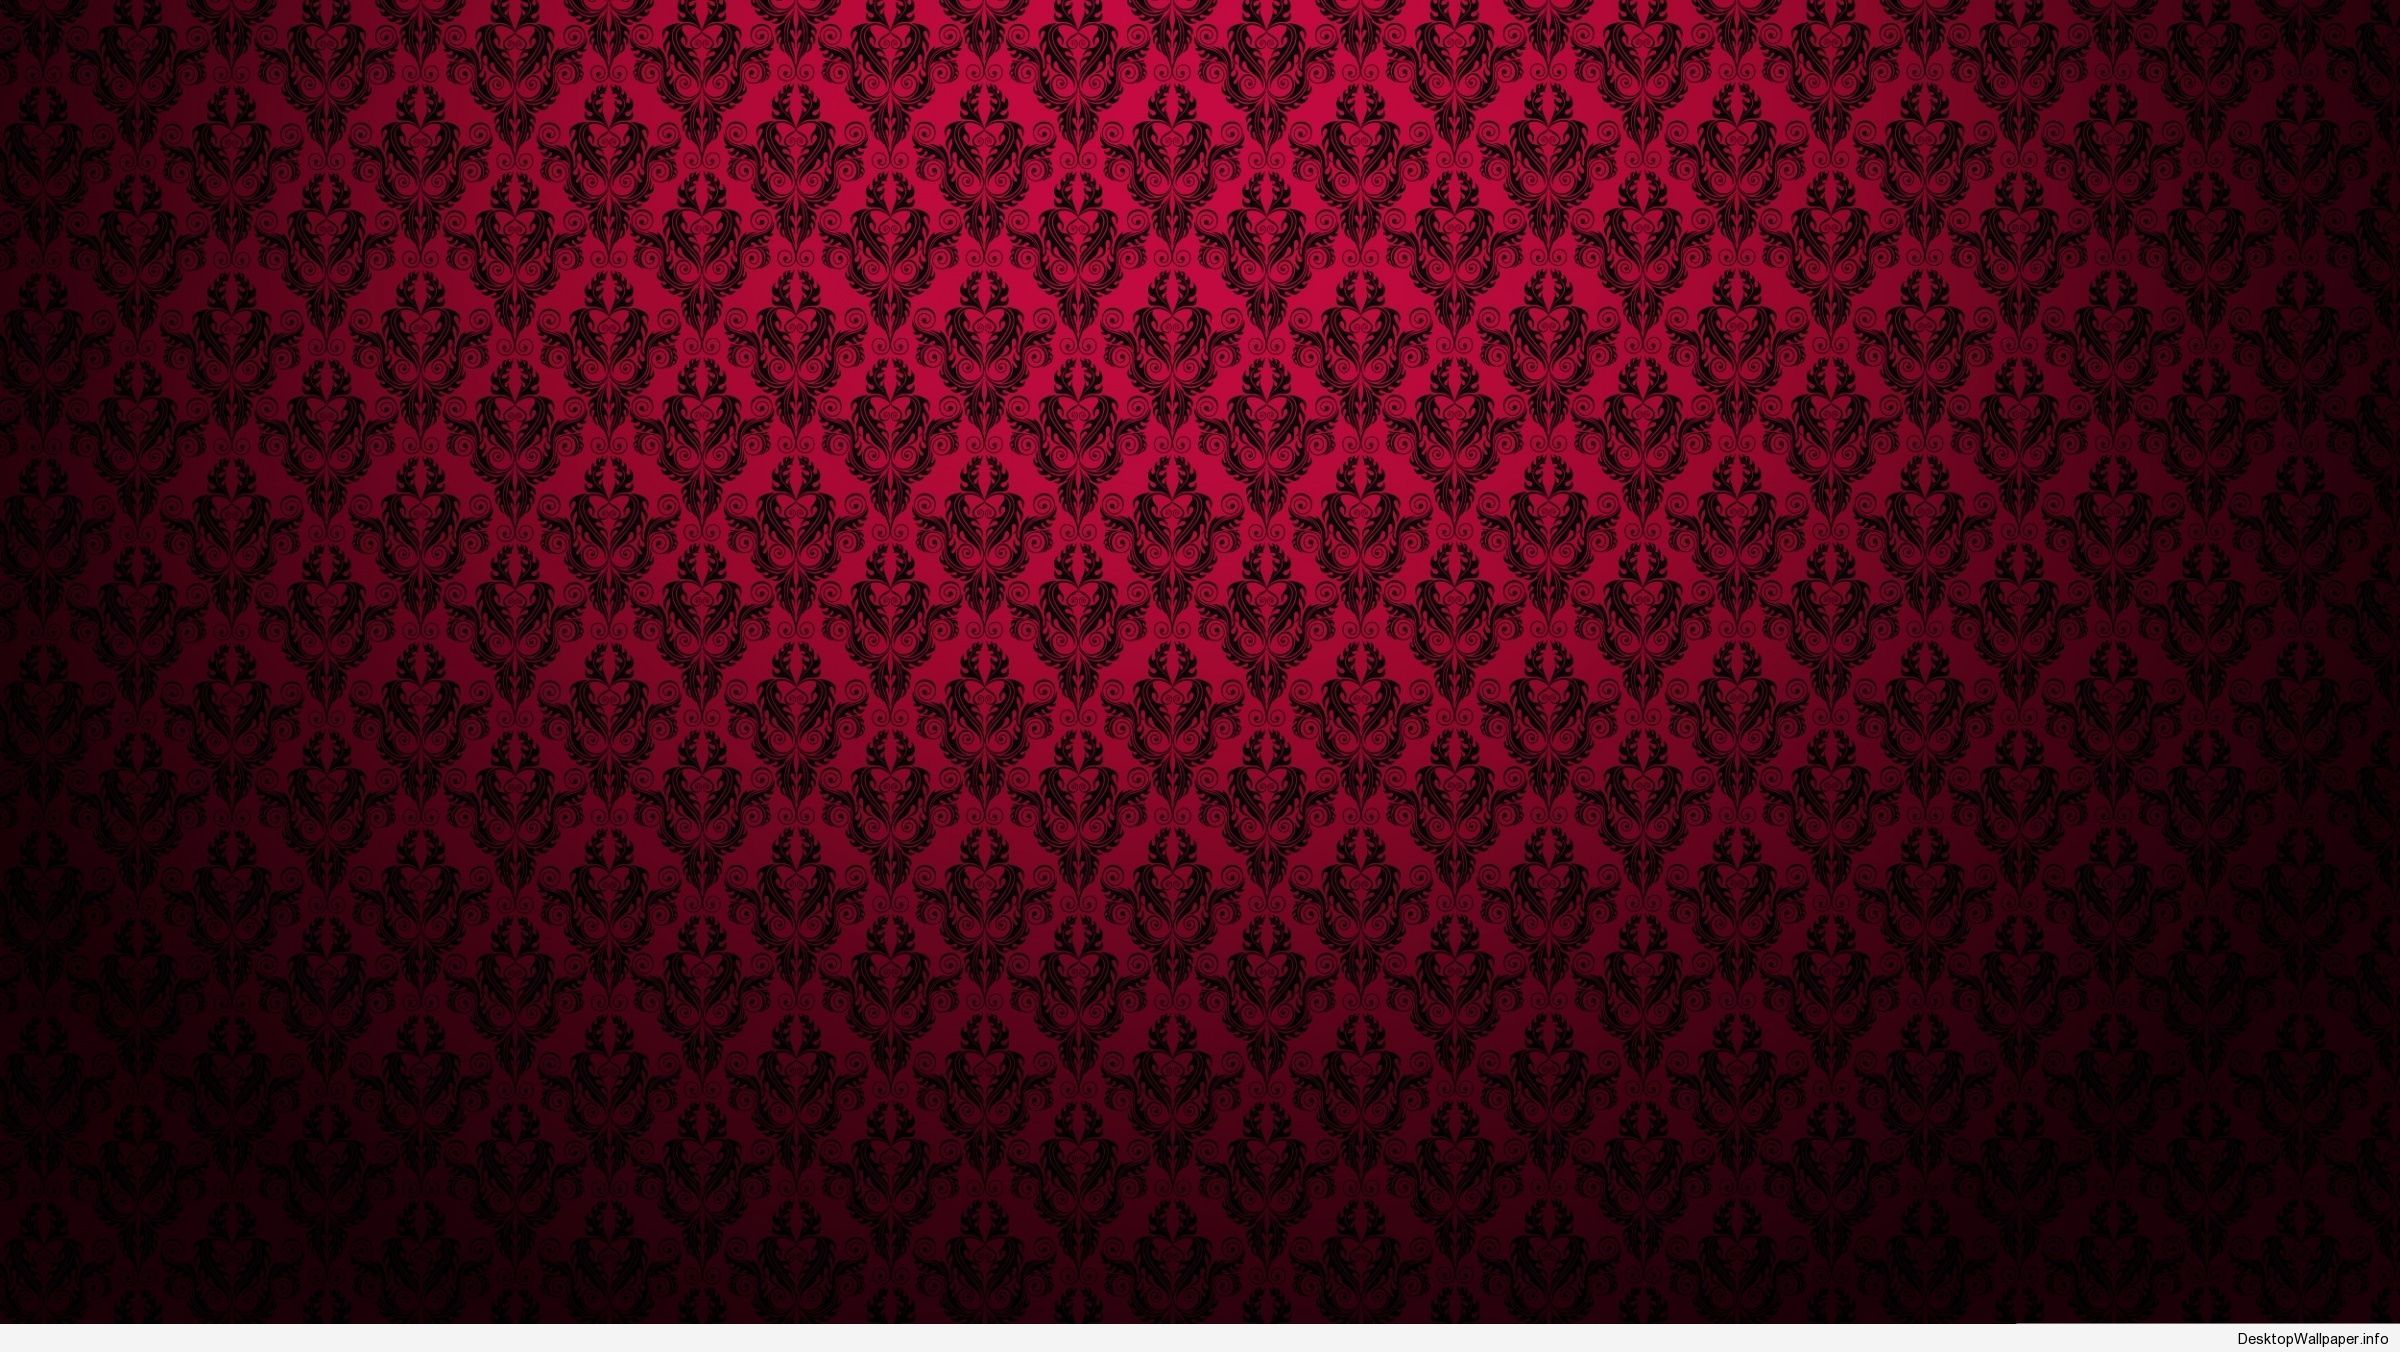 Black And Red Patterned Wallpaper /black And Red Patterned Wallpaper 6392/ #Black, #Patterned, #Wallpaper Black, Patterned, Wallpa